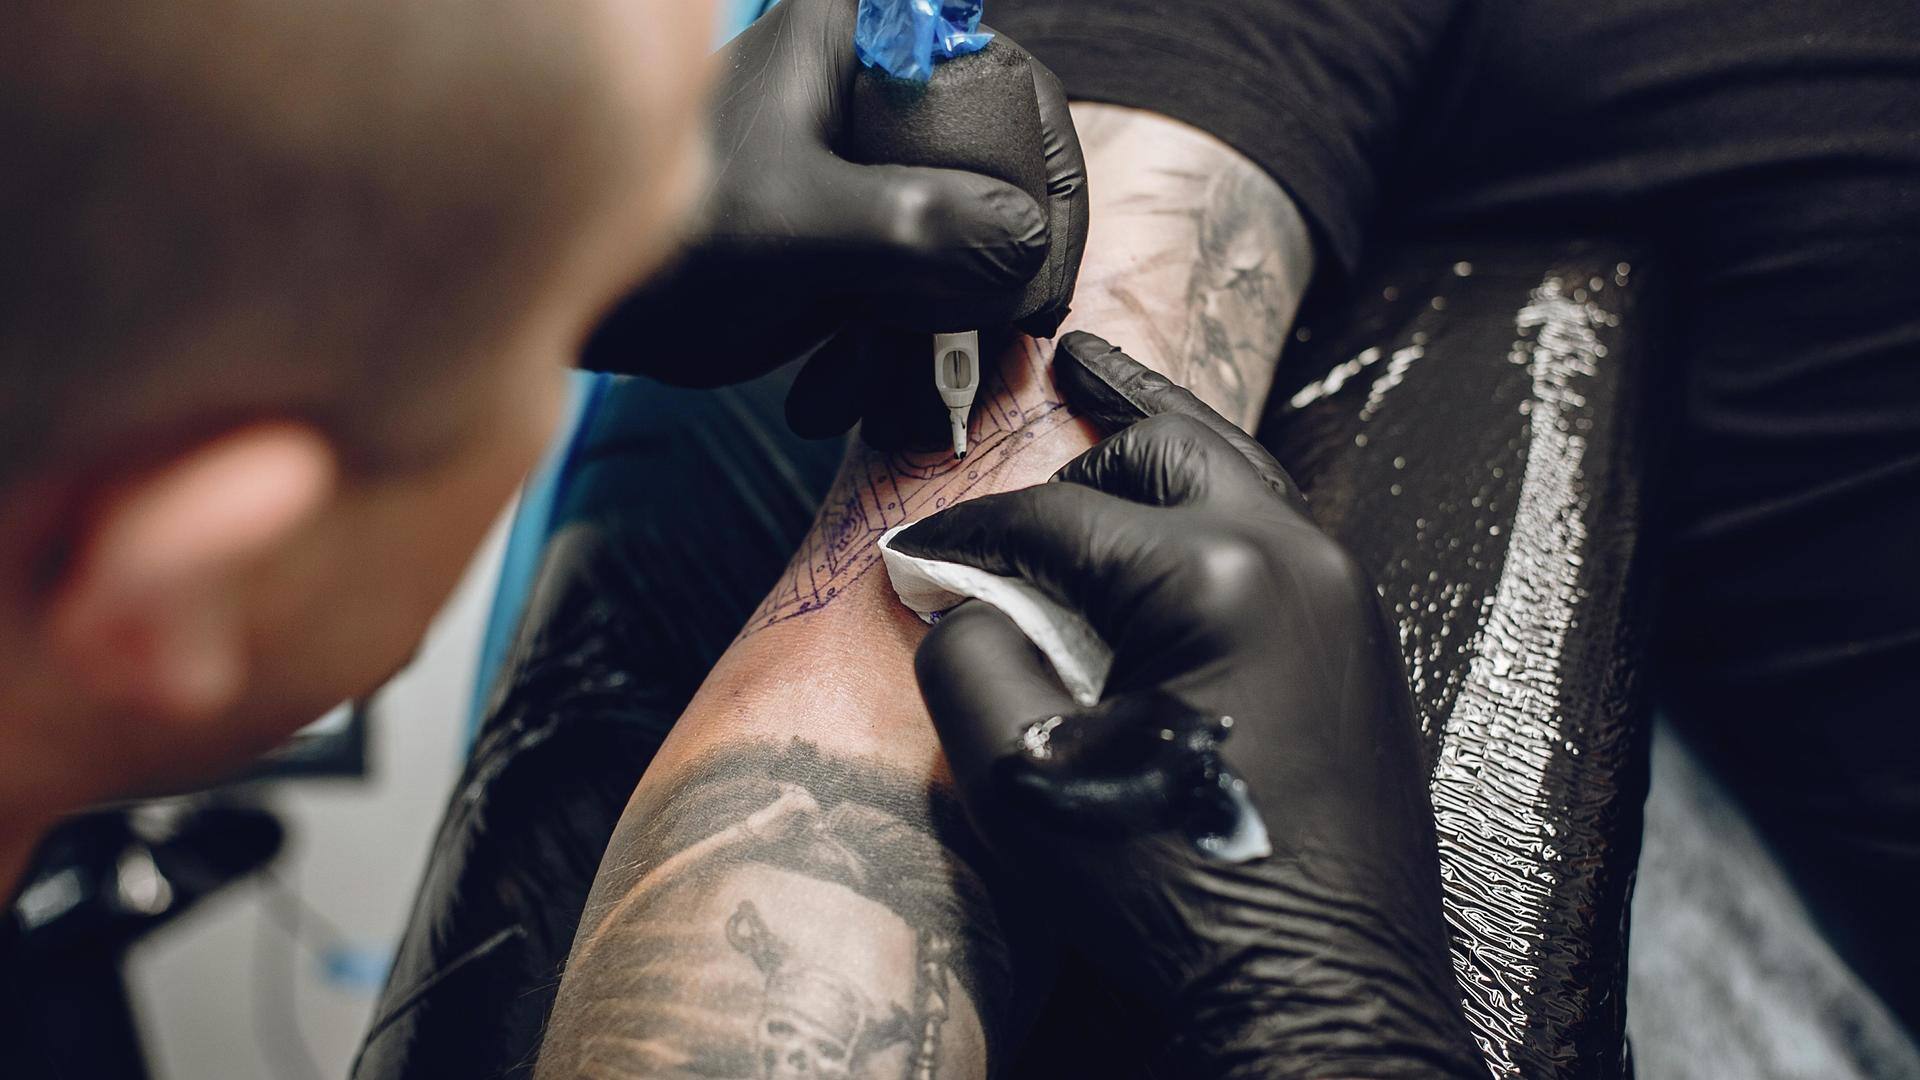 Getting inked? Get rid of these myths about tattoos first